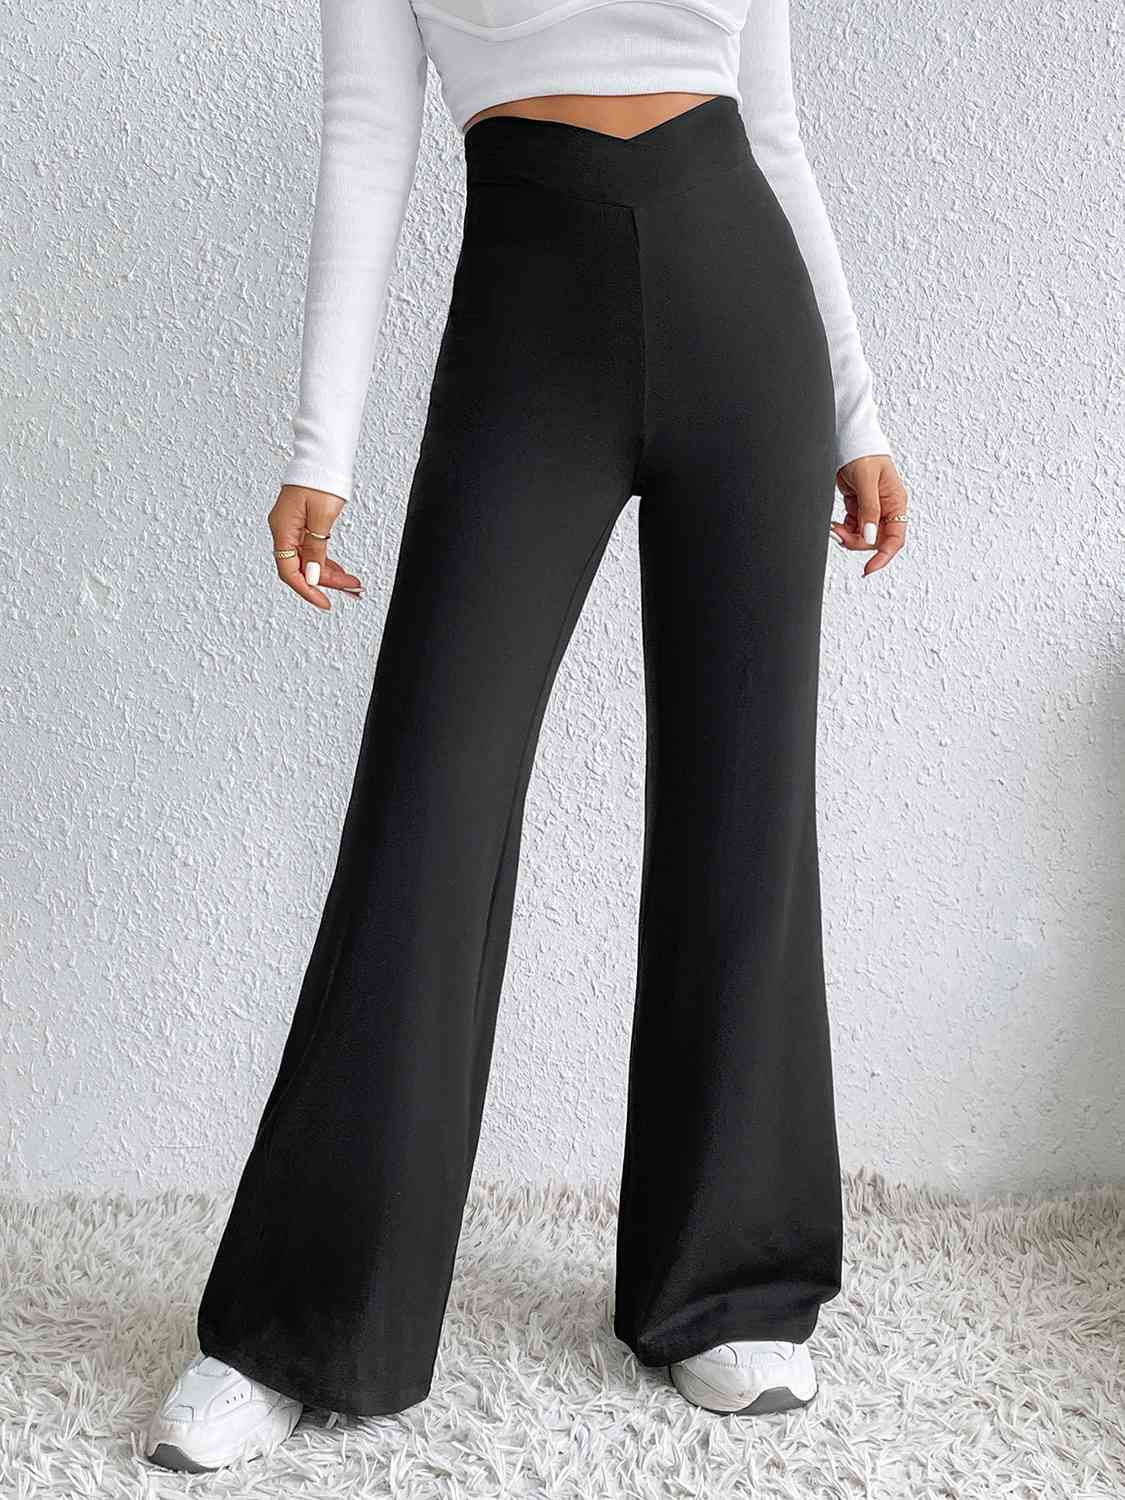 High Waist Flare Pants - Kawaii Stop - Chic Look, Classic Style, Comfortable, Confidence Boost, Easy Care, Everyday Elegance, Fashion Forward, Flare Pants, Hanny, High Waist, Opaque, Perfect Fit, Ship From Overseas, Soft Fabric, Sophisticated Style, Stretchy, Timeless, Versatile, Women's Fashion